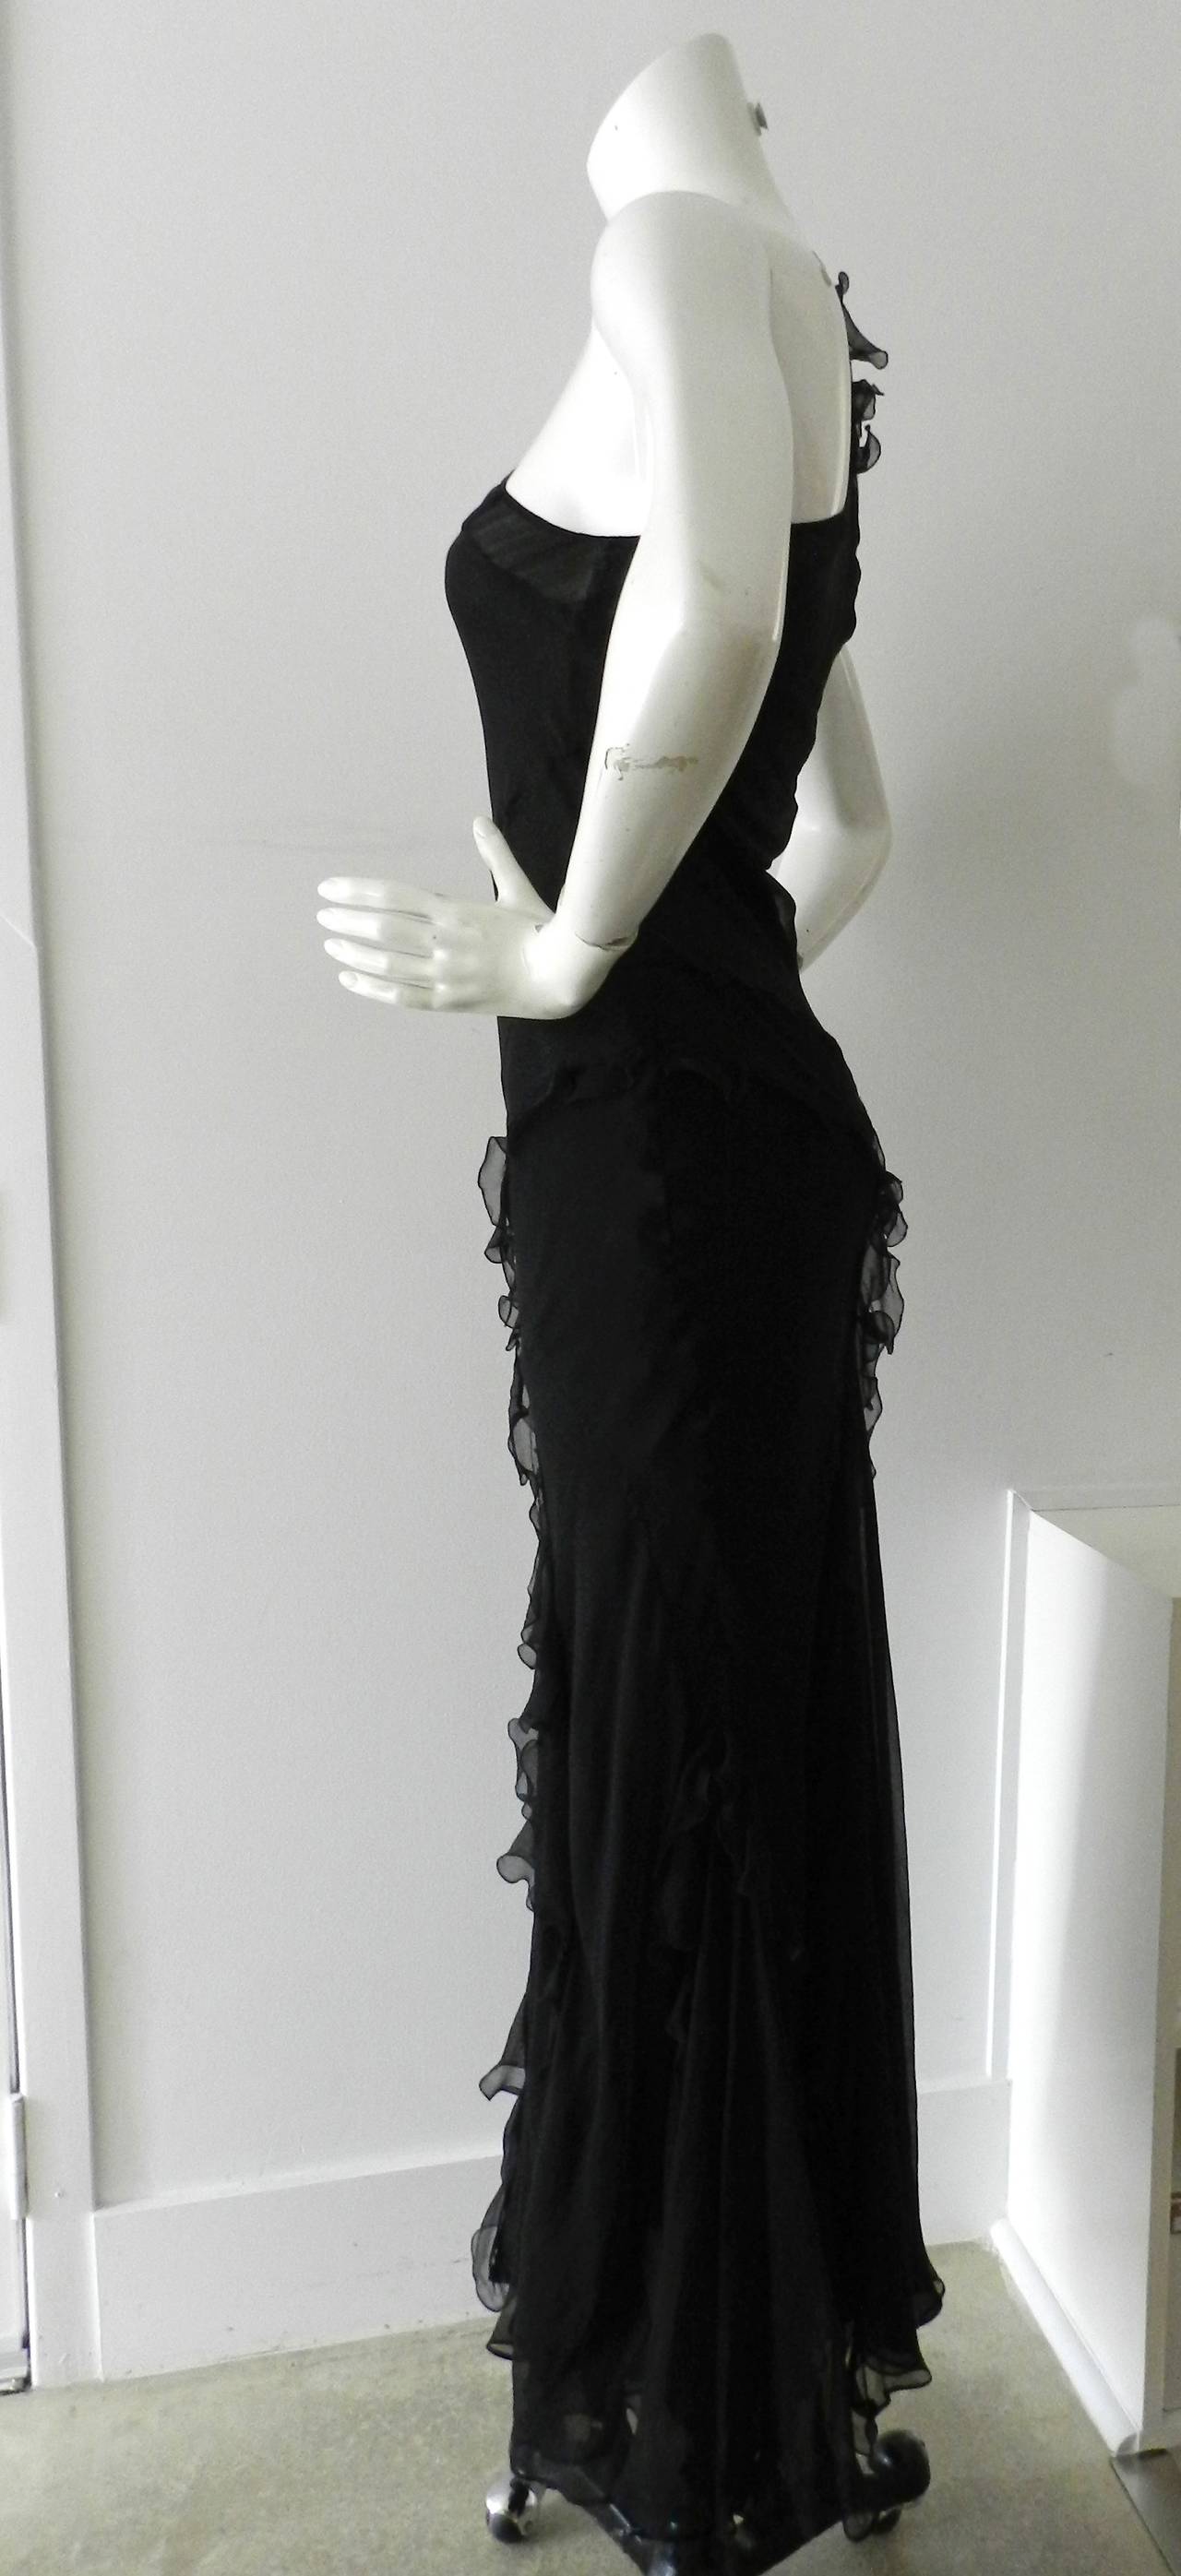 John Galliano for Christian Dior black silk chiffon gown. 1930's style design. Tagged size FR 36 (USA 4). Dress is cut on the bias so measurements have some give but a USA 4 is sized at 33